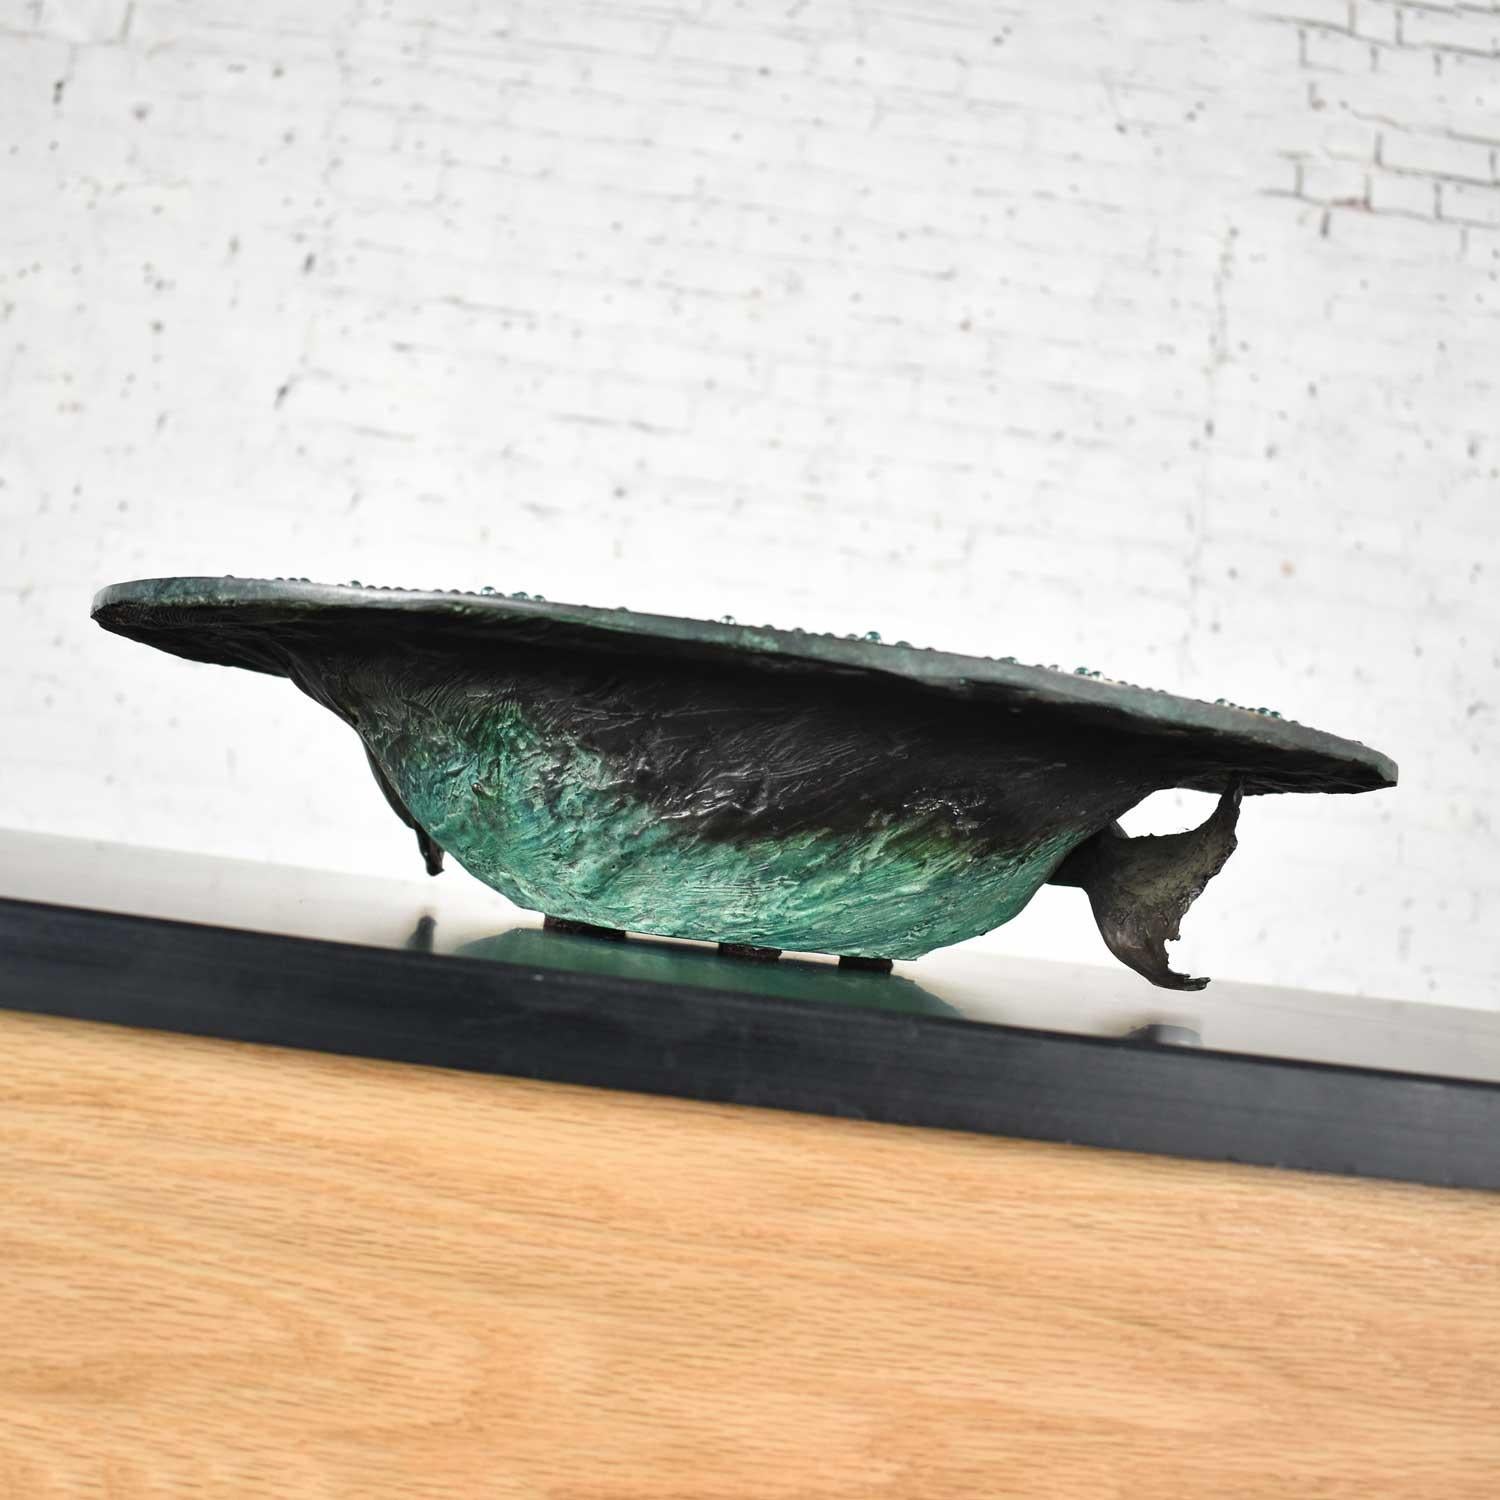 Organic Modern Cast Bronze Bowl Sculpture with Fish Design by John Forsythe For Sale 4